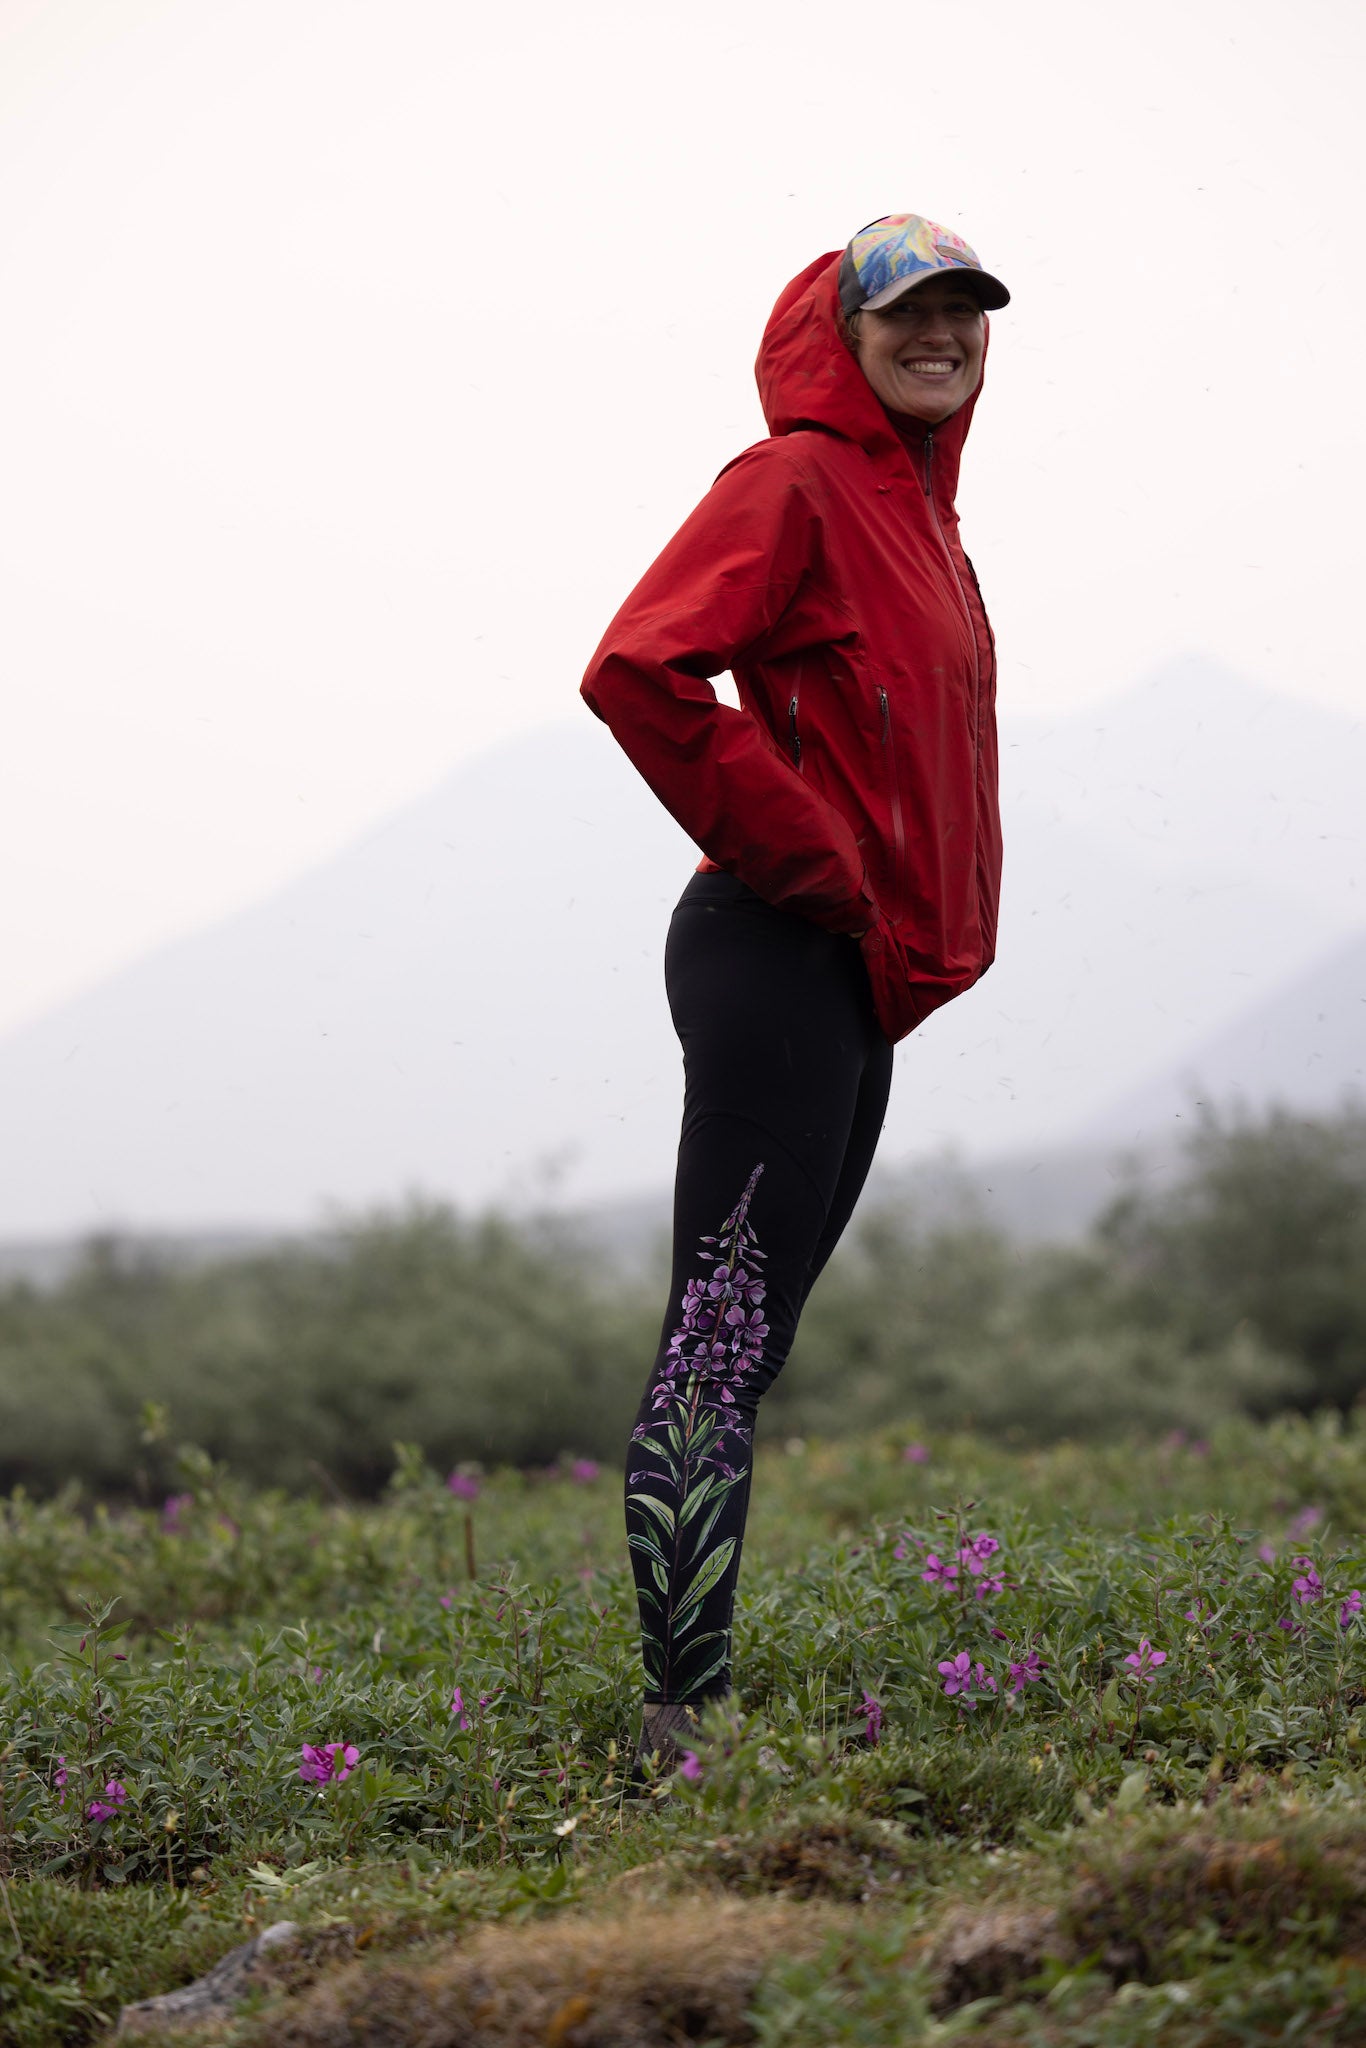 Best Compression Leggings 2022 - Compression Tights for Runners